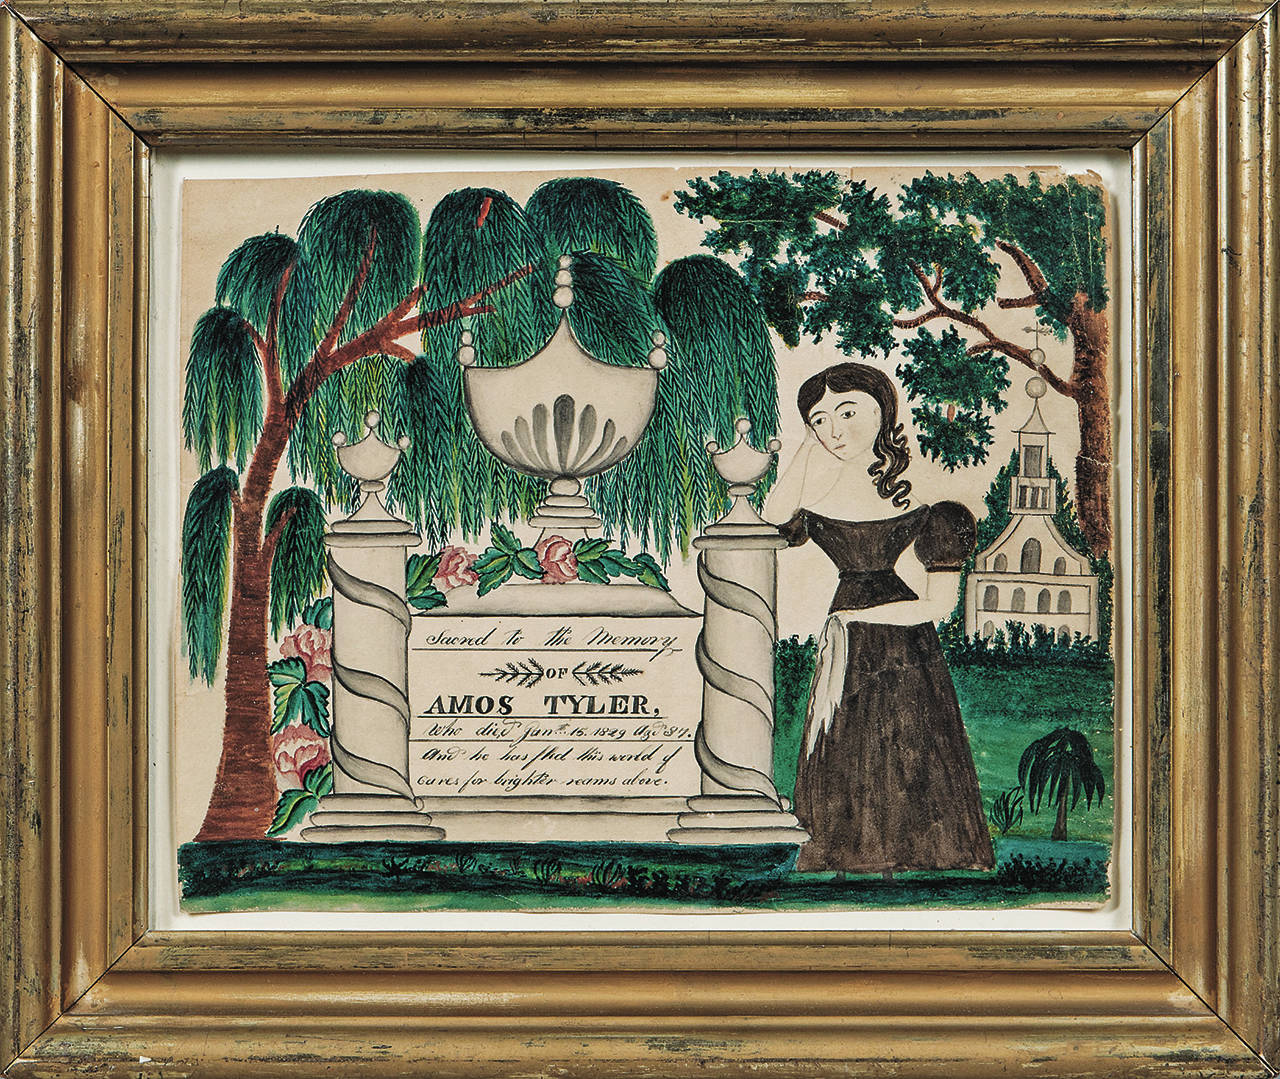 This watercolor is a mourning picture made about 1830. It is in a 7-by-9-inch frame. The picture sold for more than $22,000. (Cowles Syndicate Inc.)